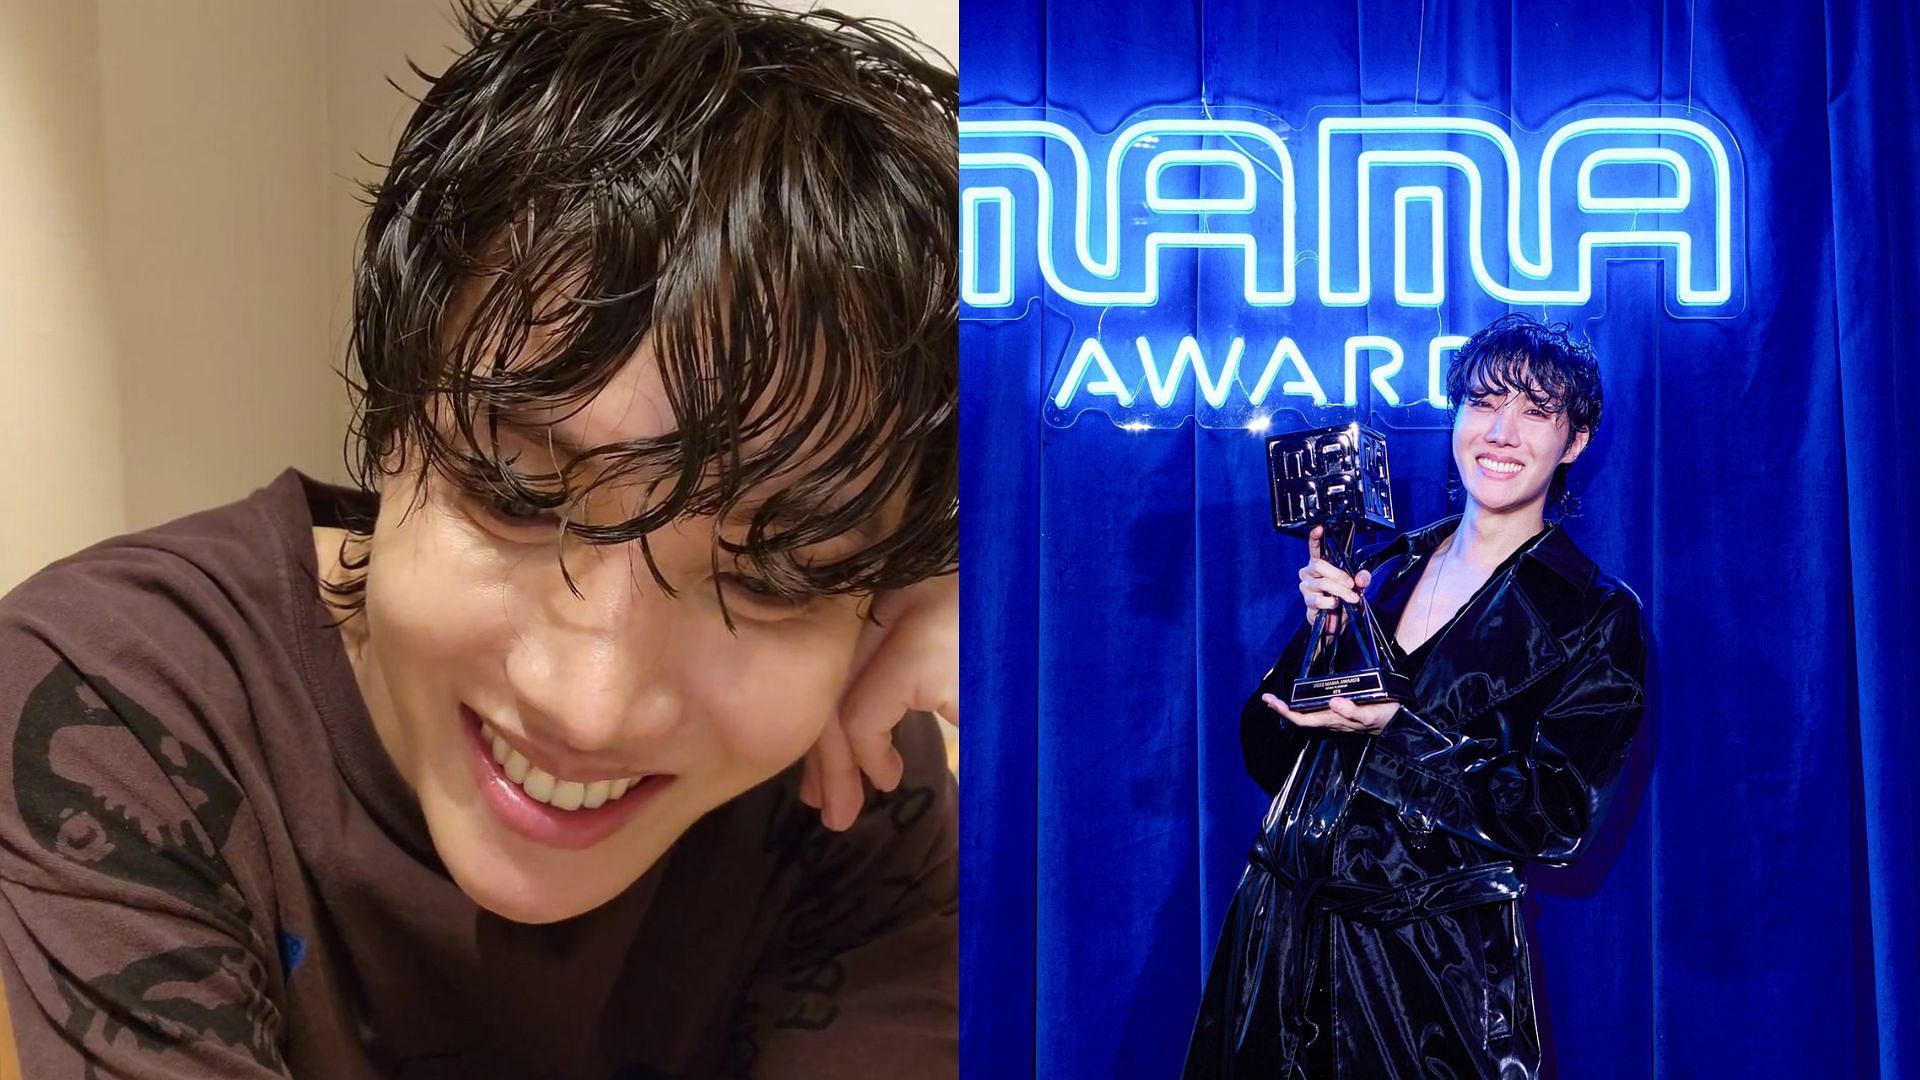 “We won that much?” BTS’ jhope talks about MAMA Awards’ meaningful